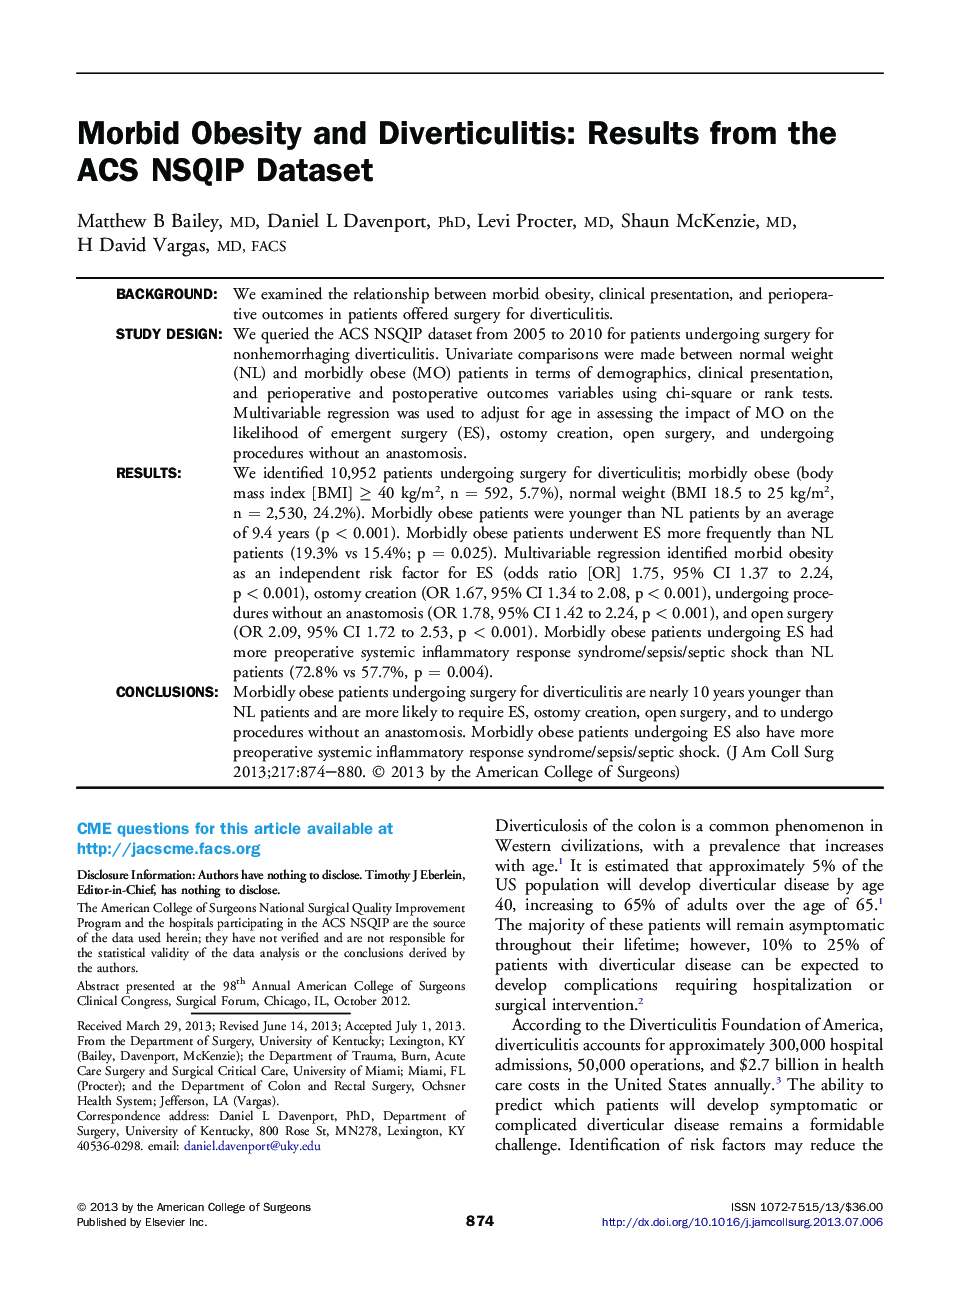 Original scientific articleMorbid Obesity and Diverticulitis: Results from the ACS NSQIP Dataset